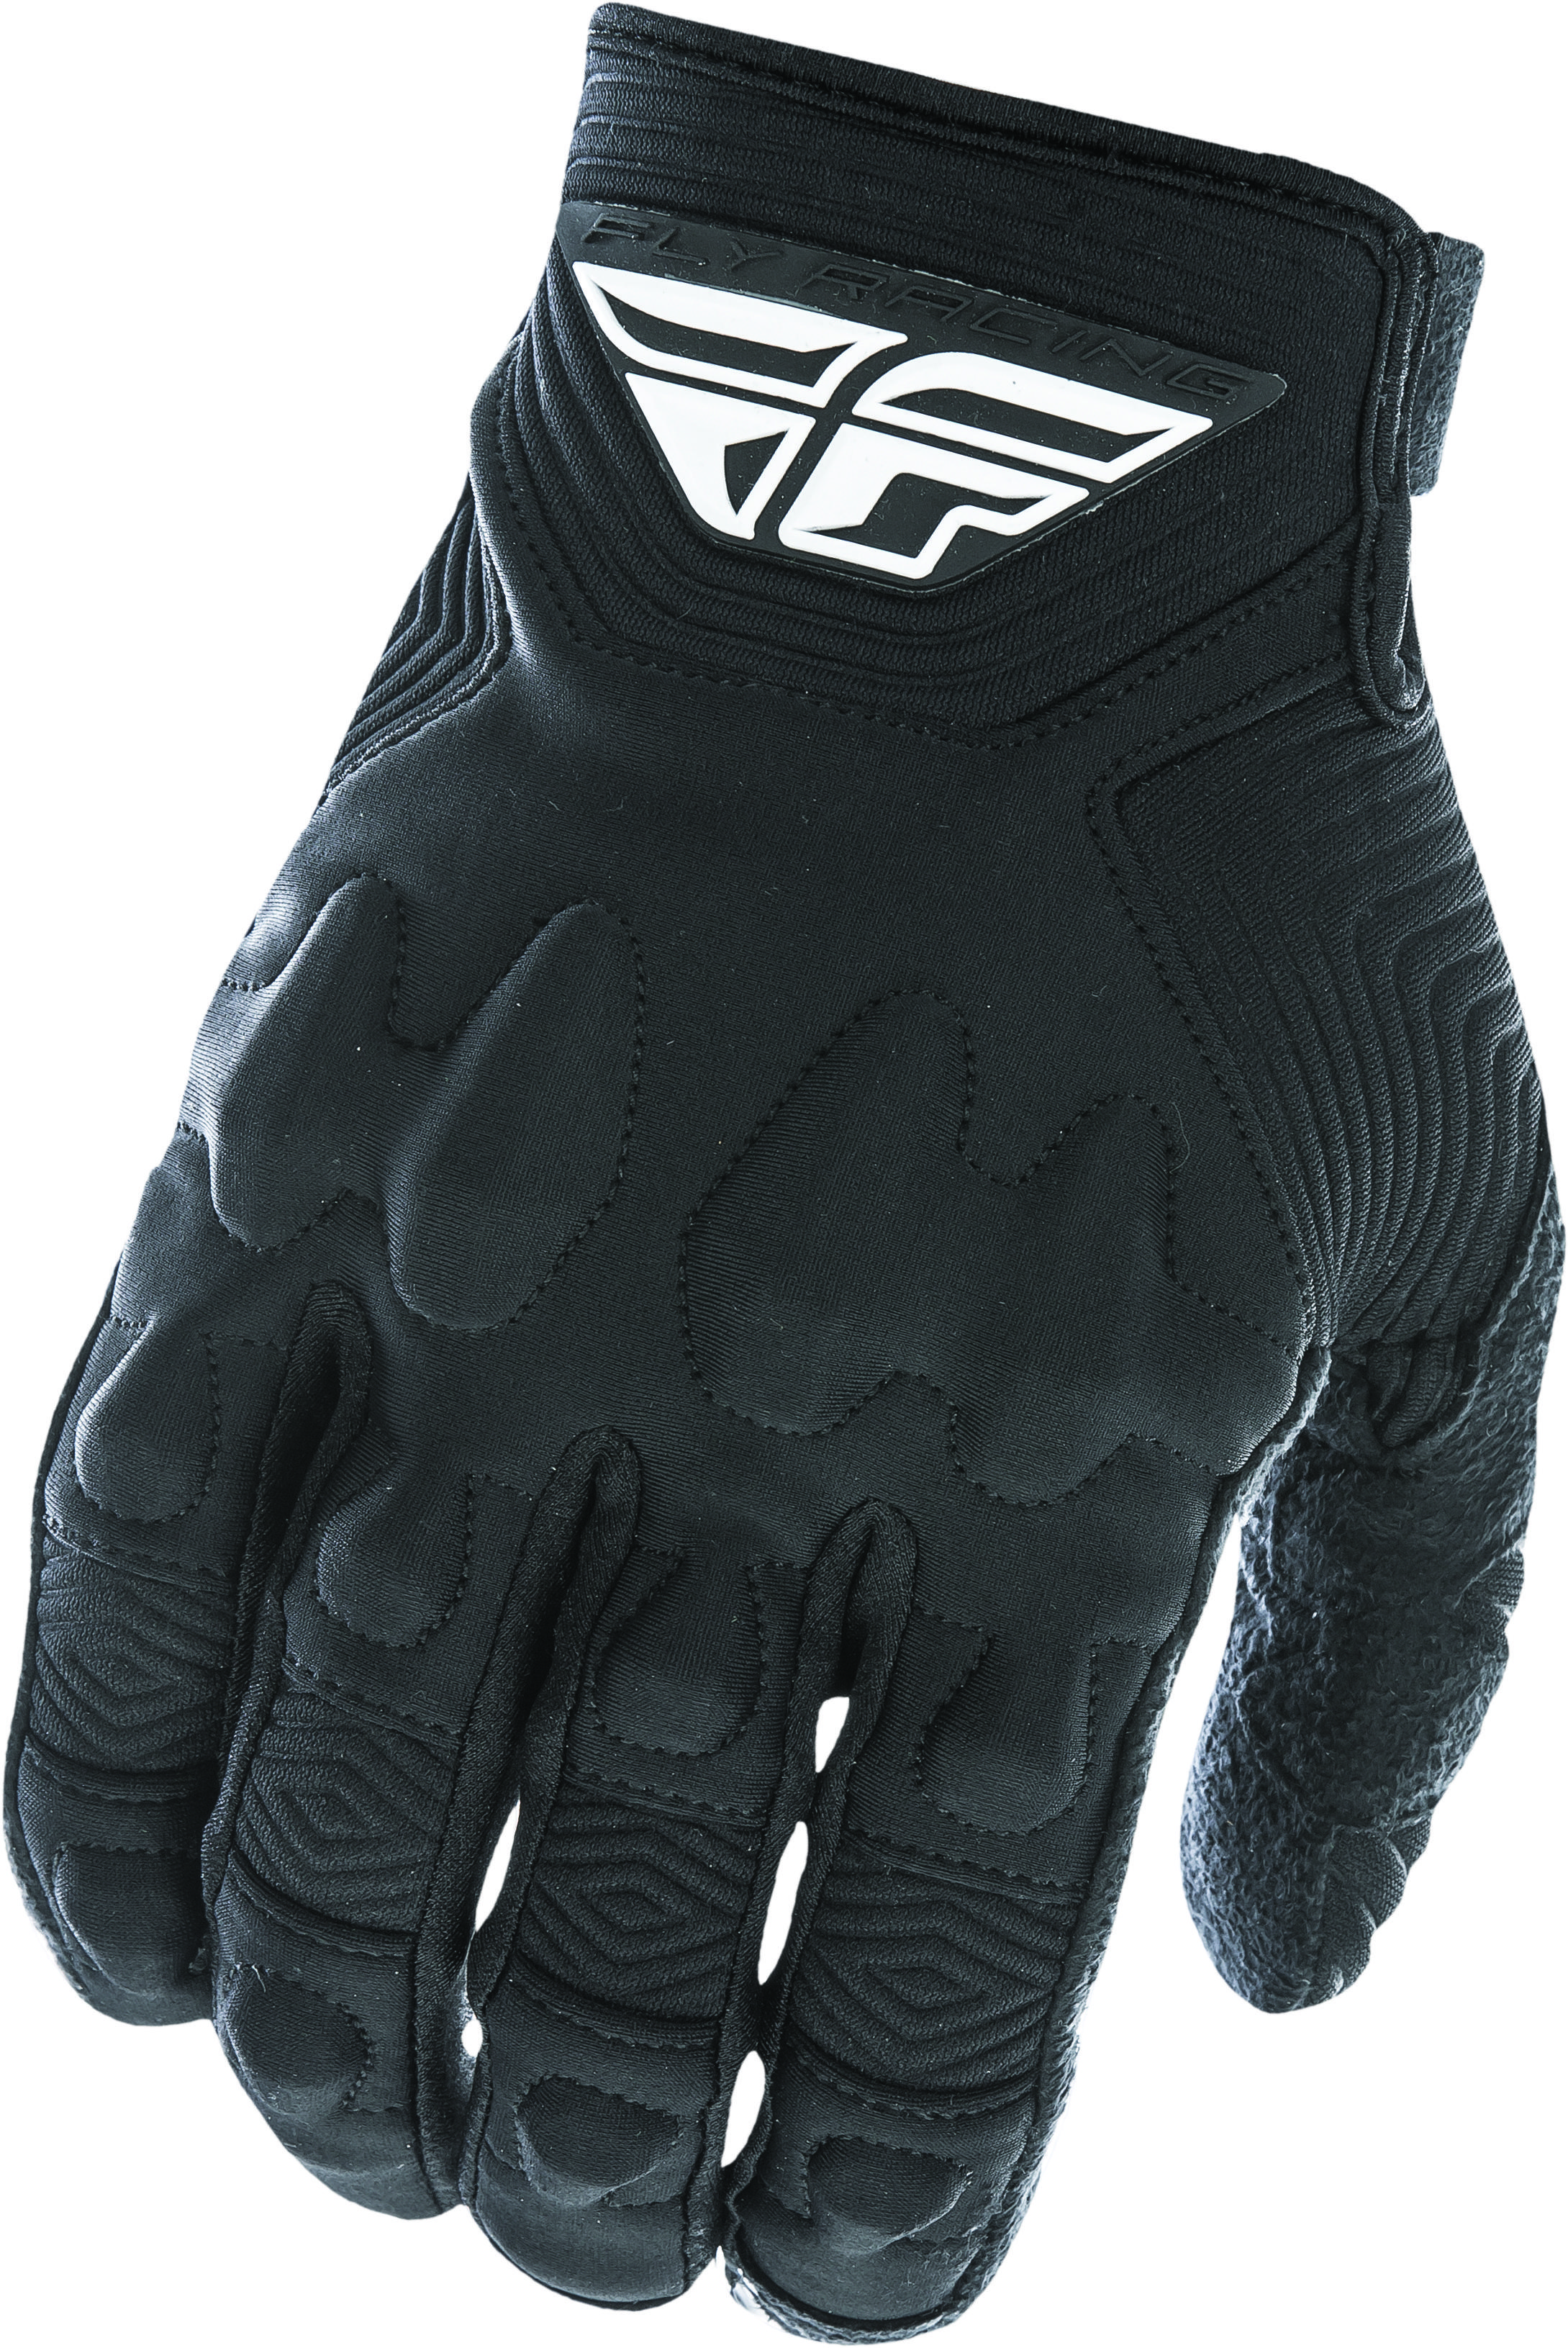 Patrol Xc Lite Riding Gloves For MX & Off-Road Black Size 10 - Click Image to Close